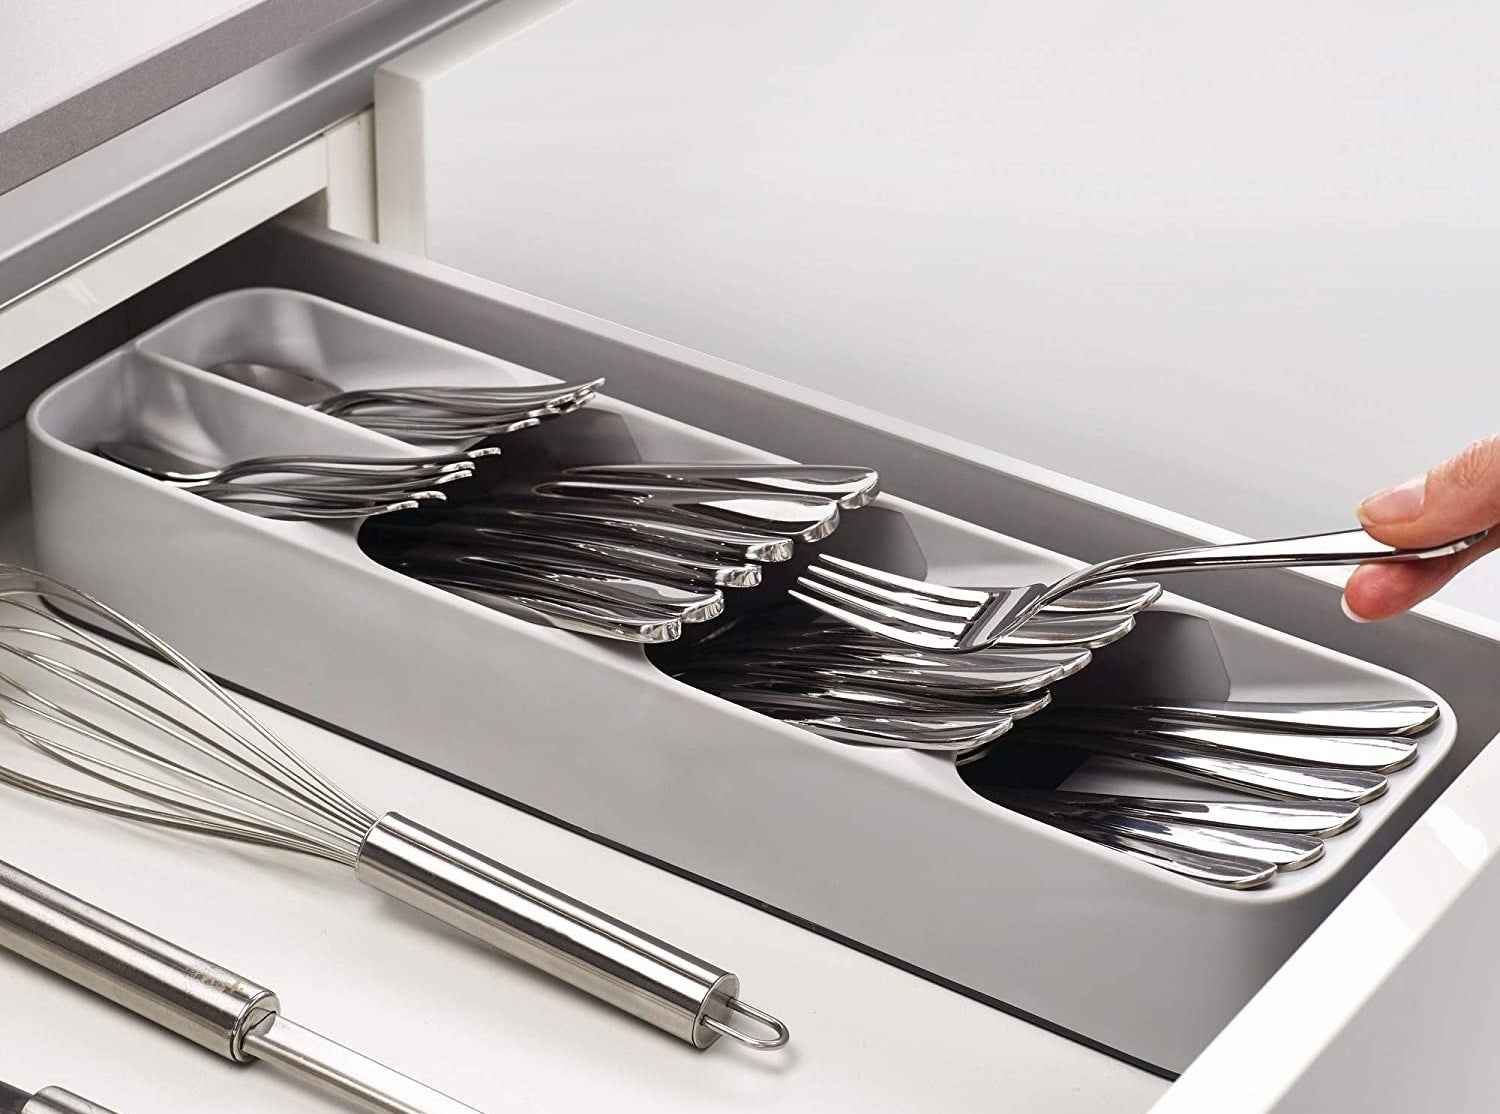 Model&#x27;s fingers removing a fork from a neat stack of utensils in a gray plastic utensil organizer with five sections for knives, spoons, and more